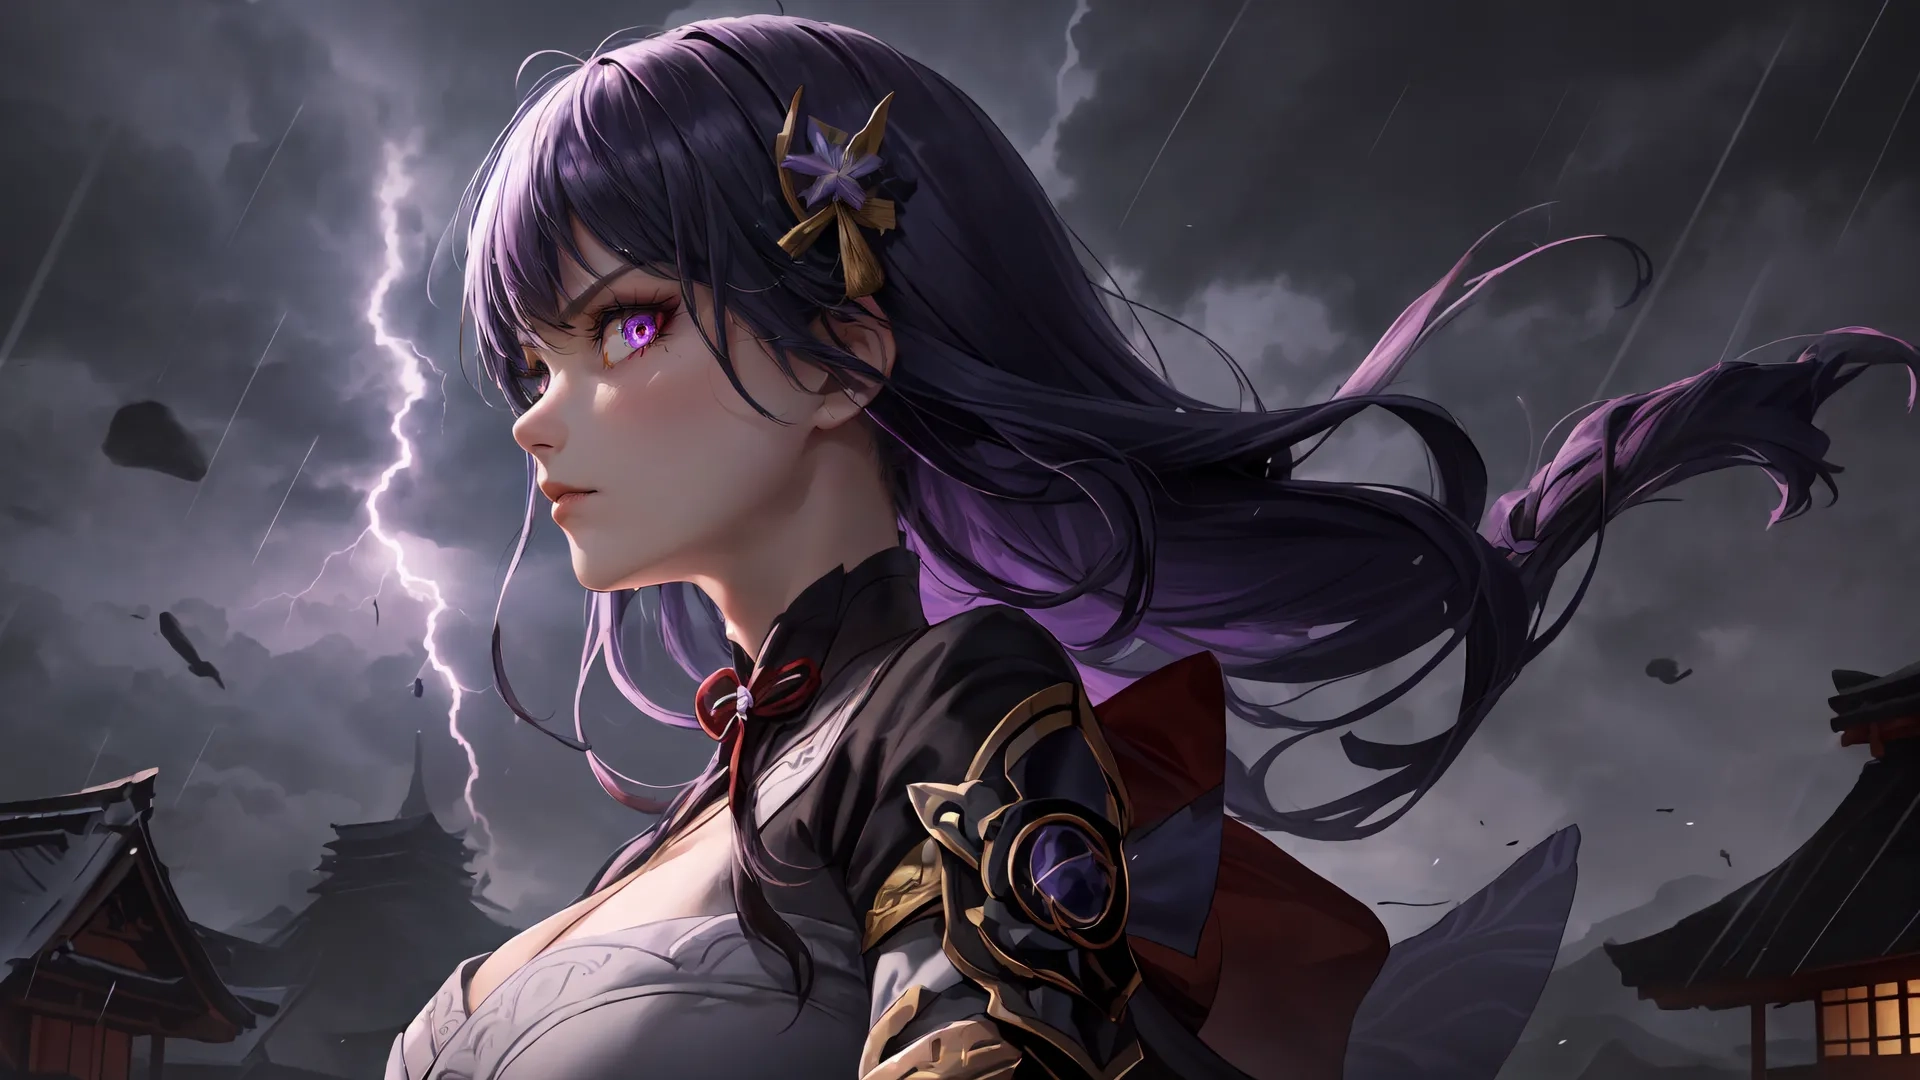 an anime has purple hair and is looking in the direction of a lightning storm on her shoulder she is wearing a gray top and purple shorts and has long
